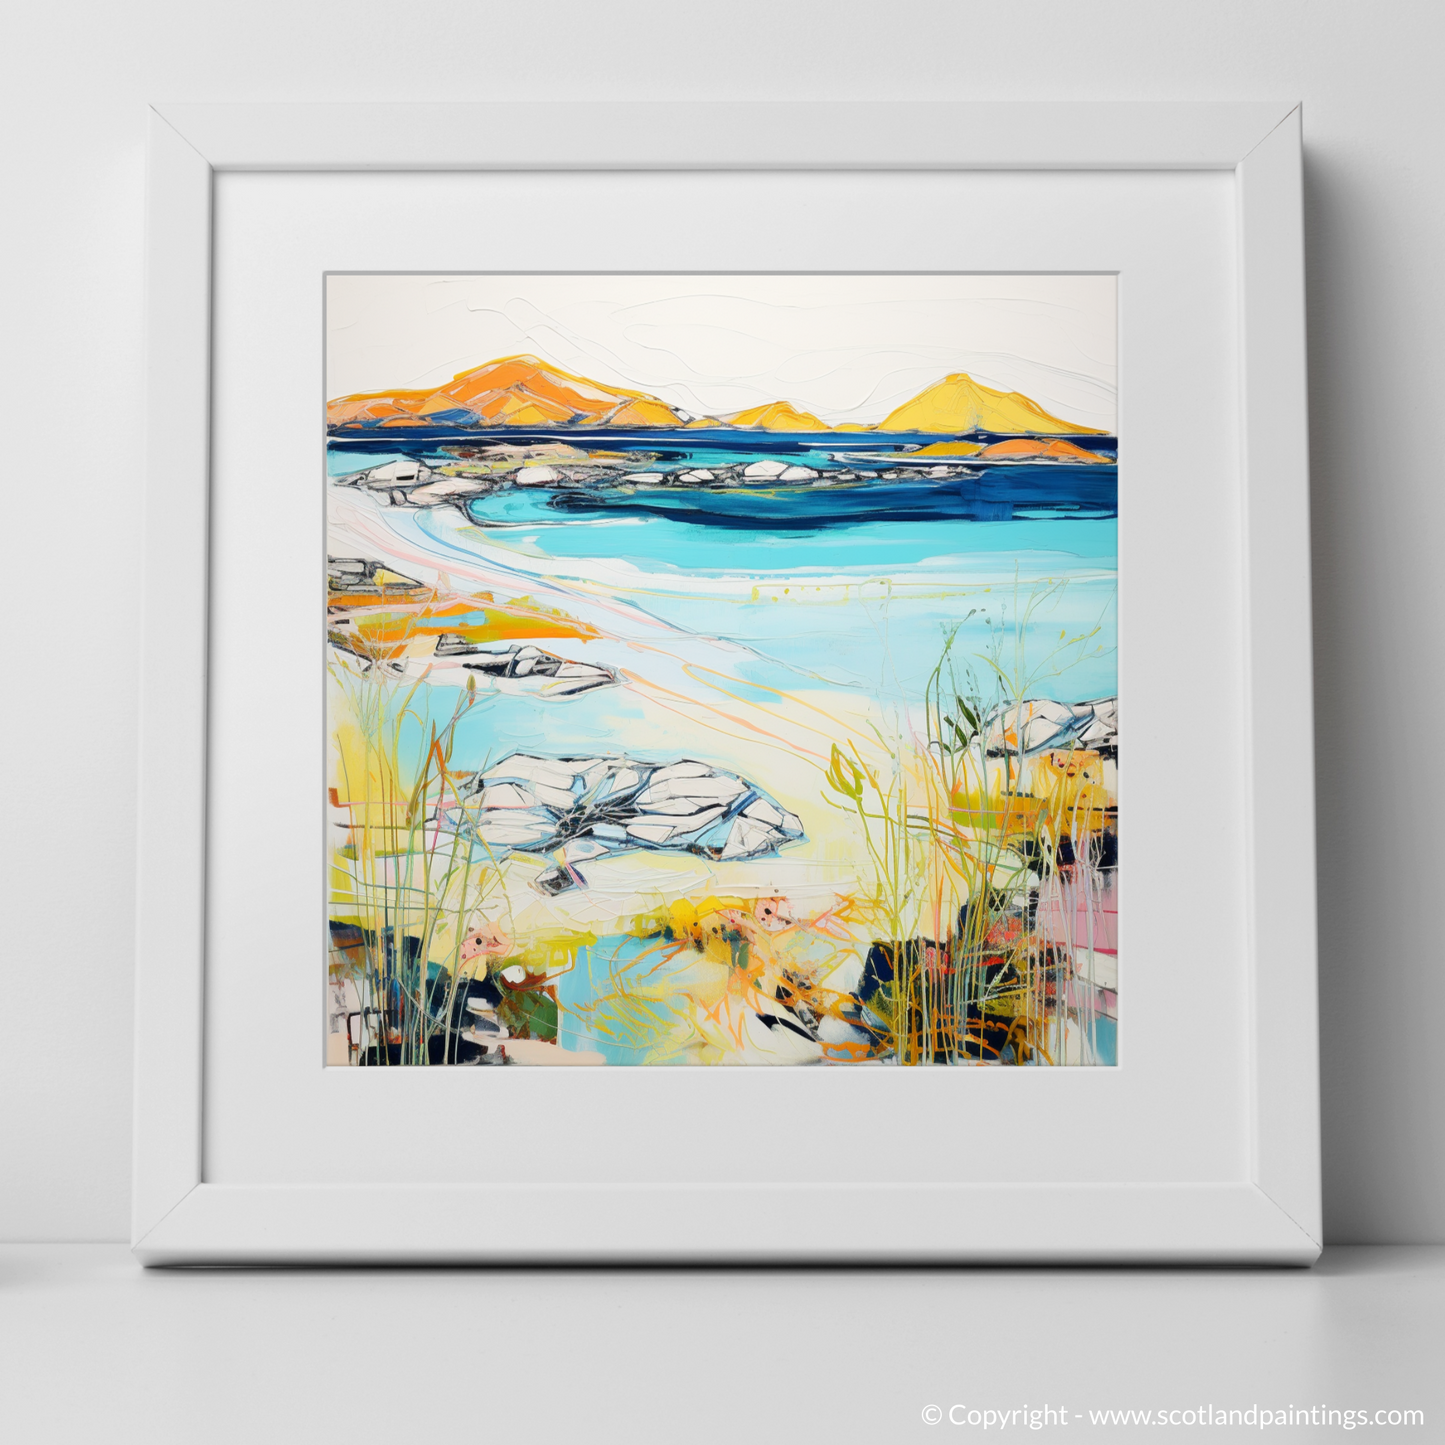 Art Print of Isle of Barra with a white frame